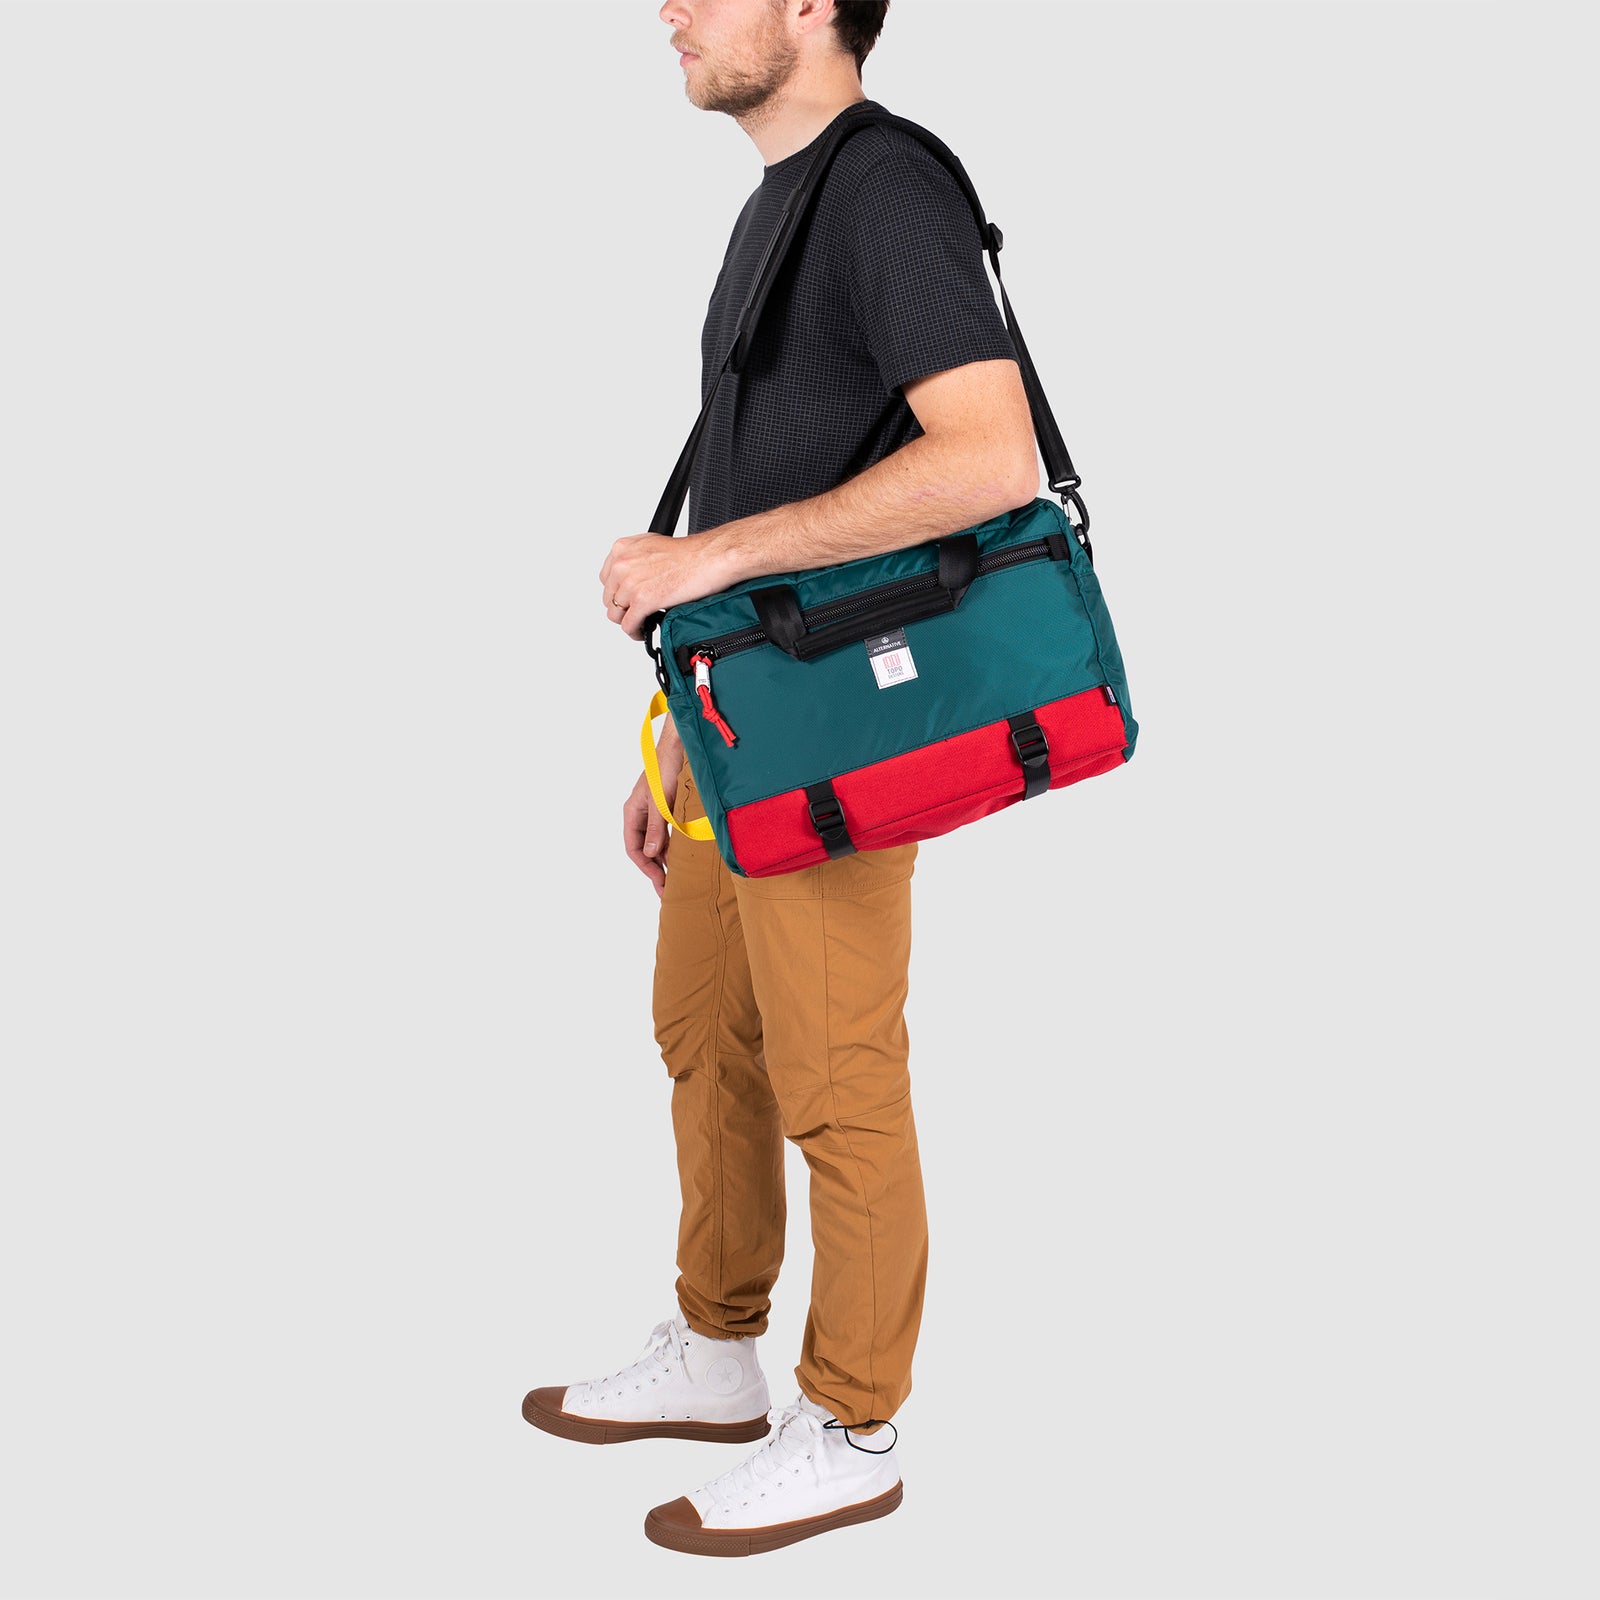 Model shot of Topo Designs x Alternative Commuter Briefcase in red/teal showing shoulder strap carry style